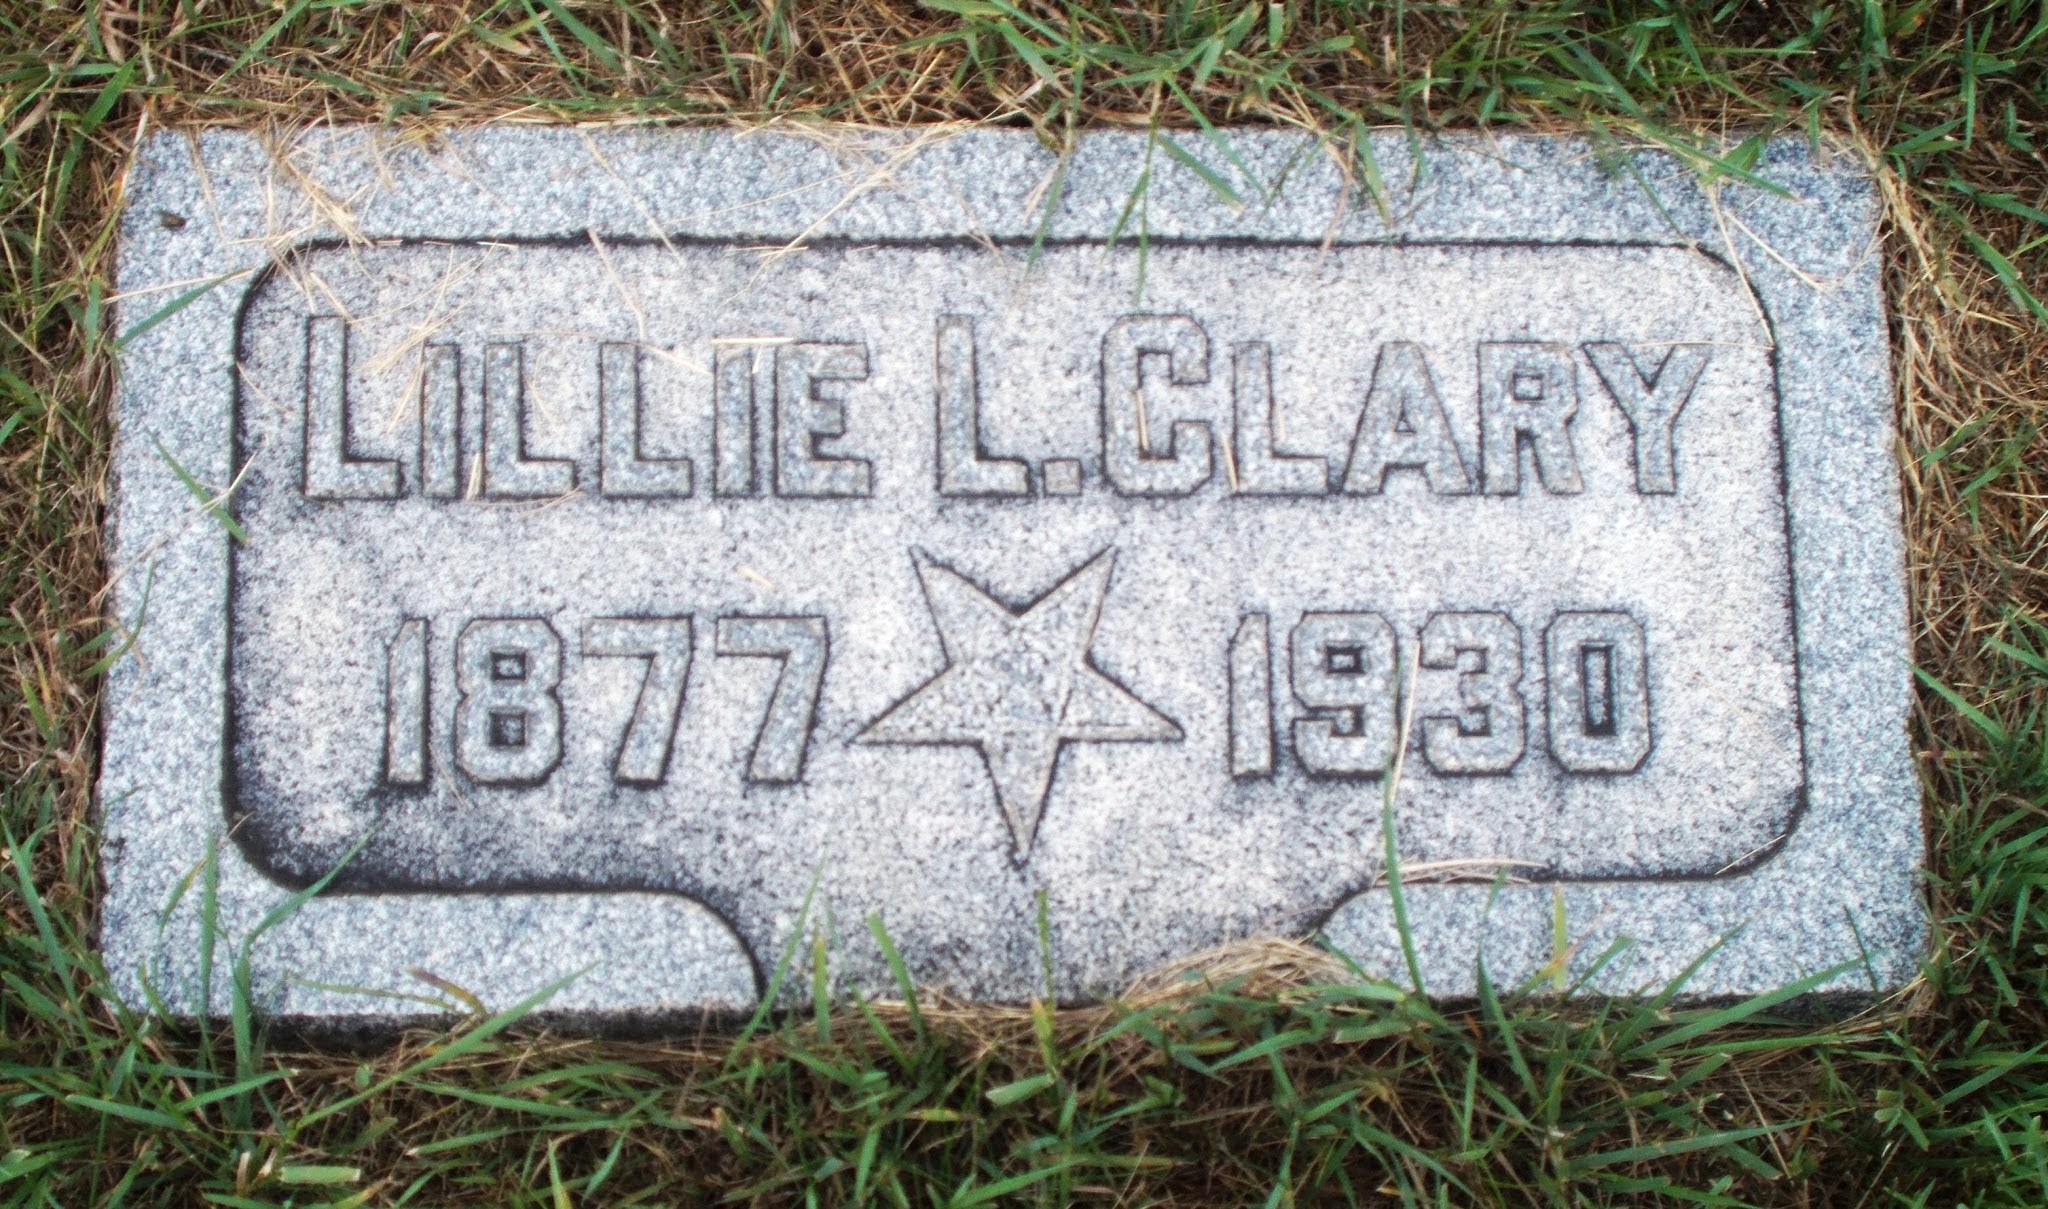 Lillie L Clary